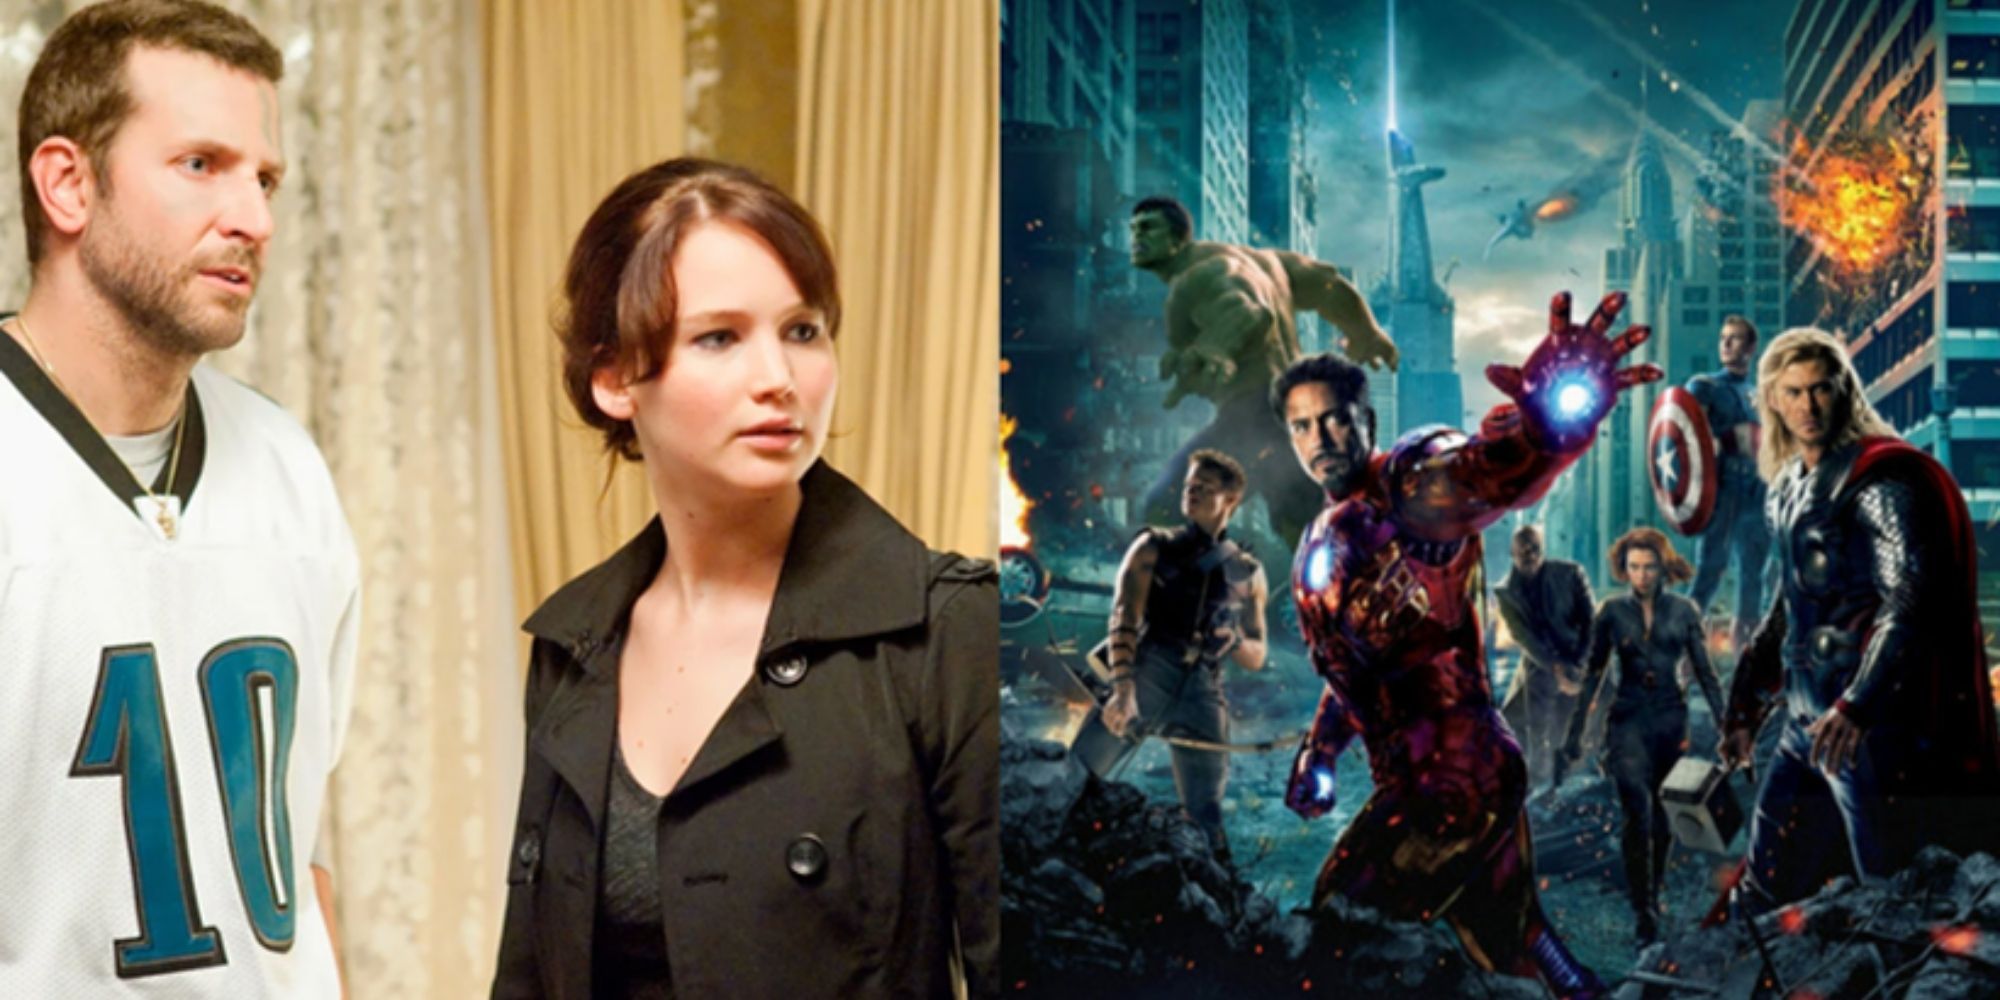 Split image showing scenes from Silver Linings Plyabooks and The Avengers.